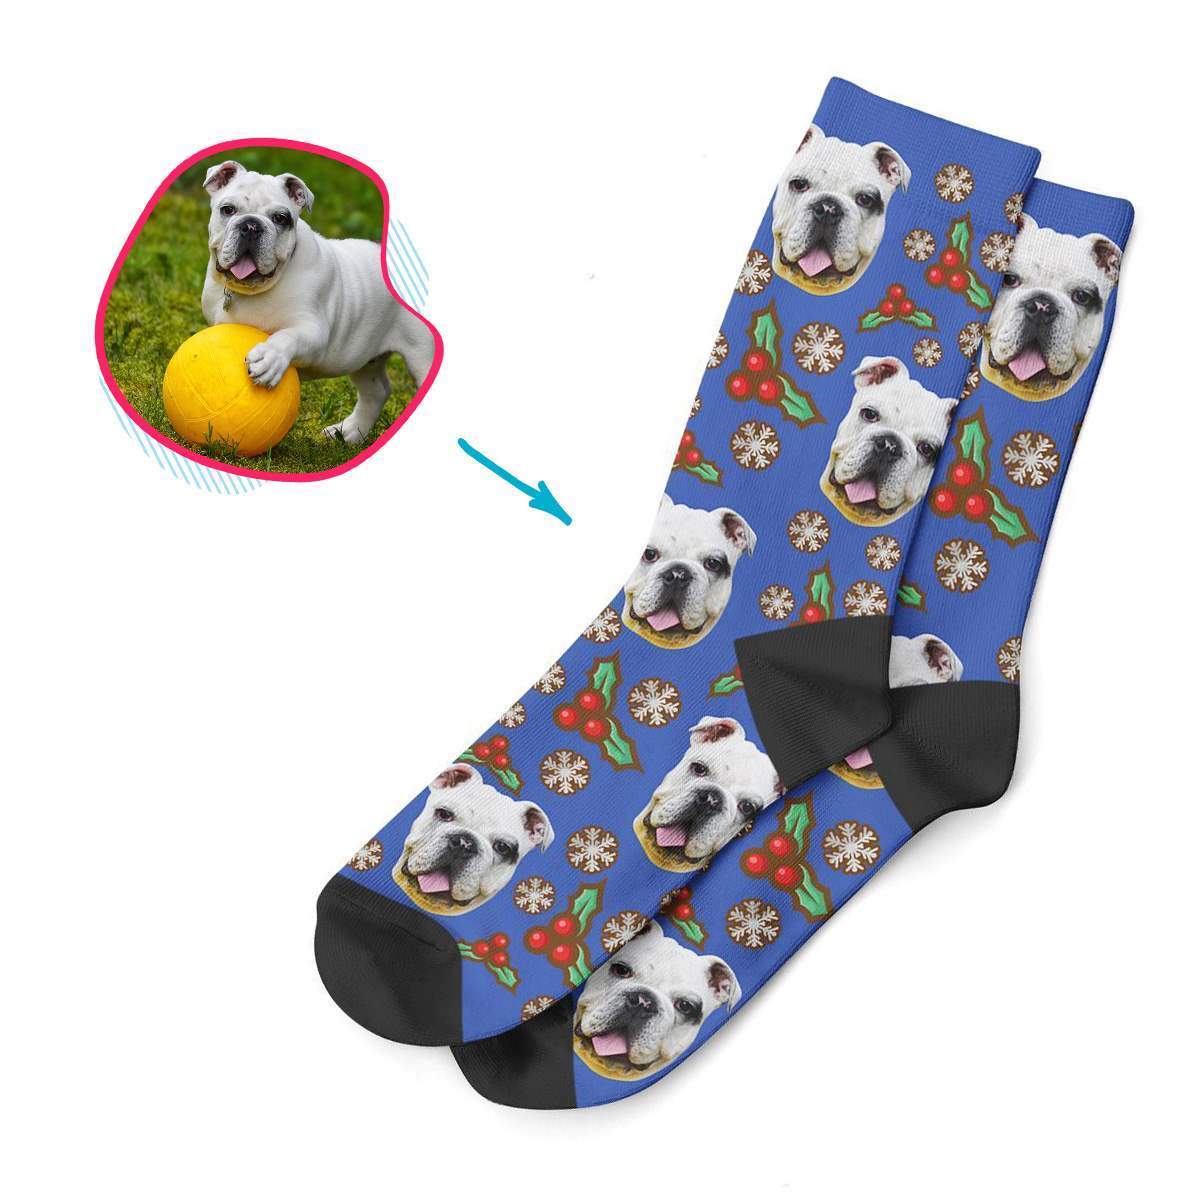 darkblue Mistletoe socks personalized with photo of face printed on them